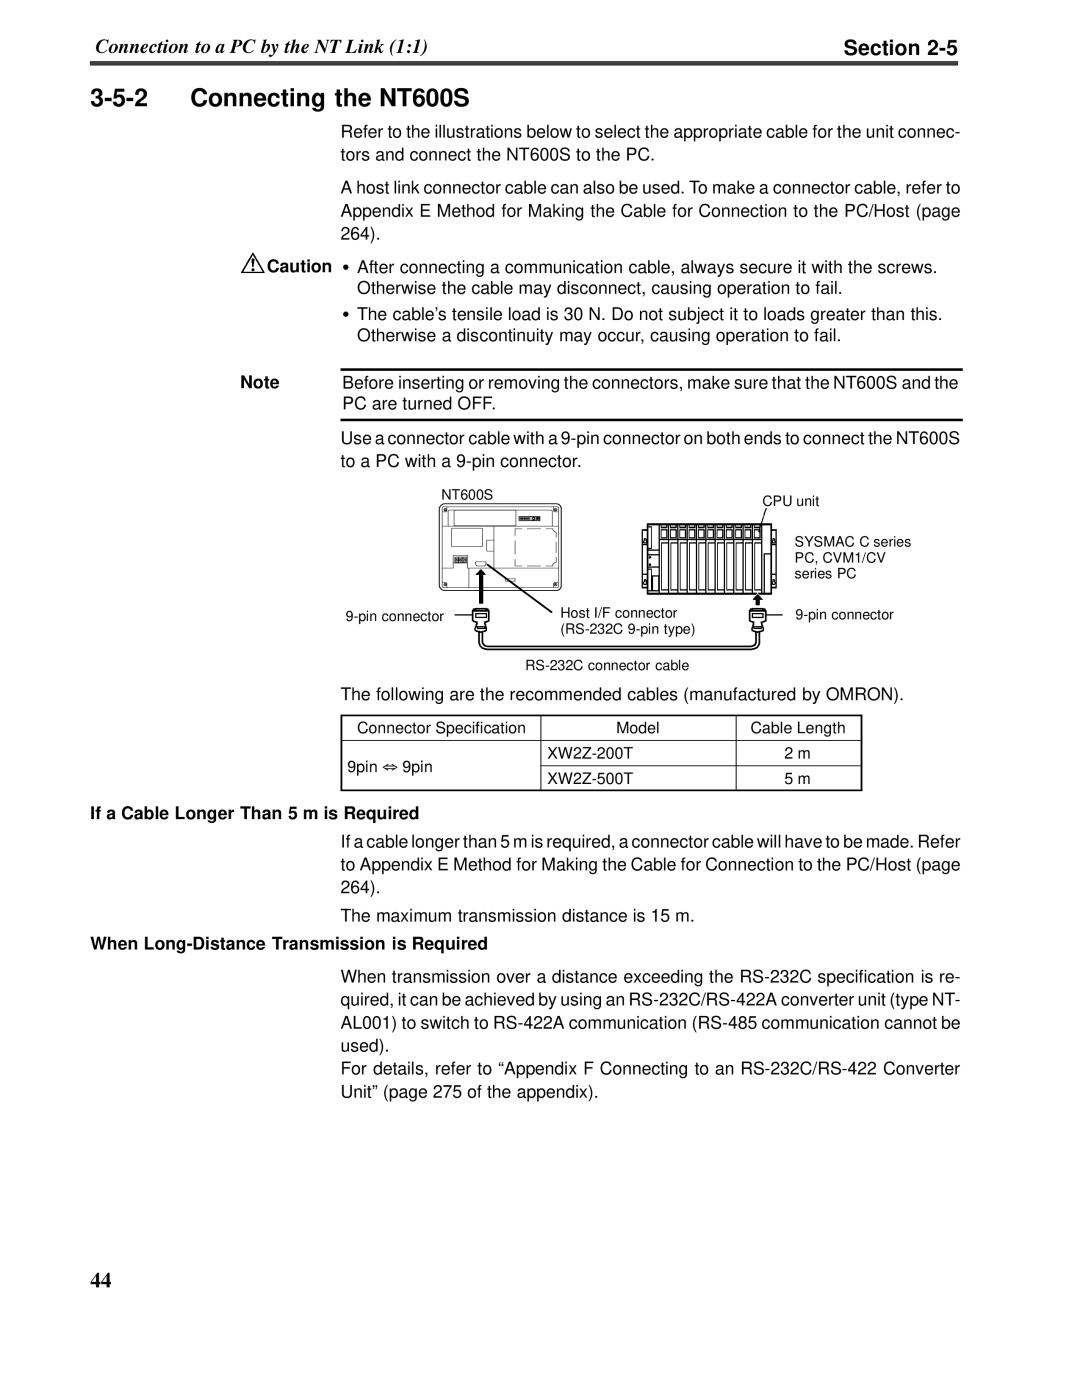 Omron V022-E3-1 operation manual 3-5-2Connecting the NT600S, Section, If a Cable Longer Than 5 m is Required 